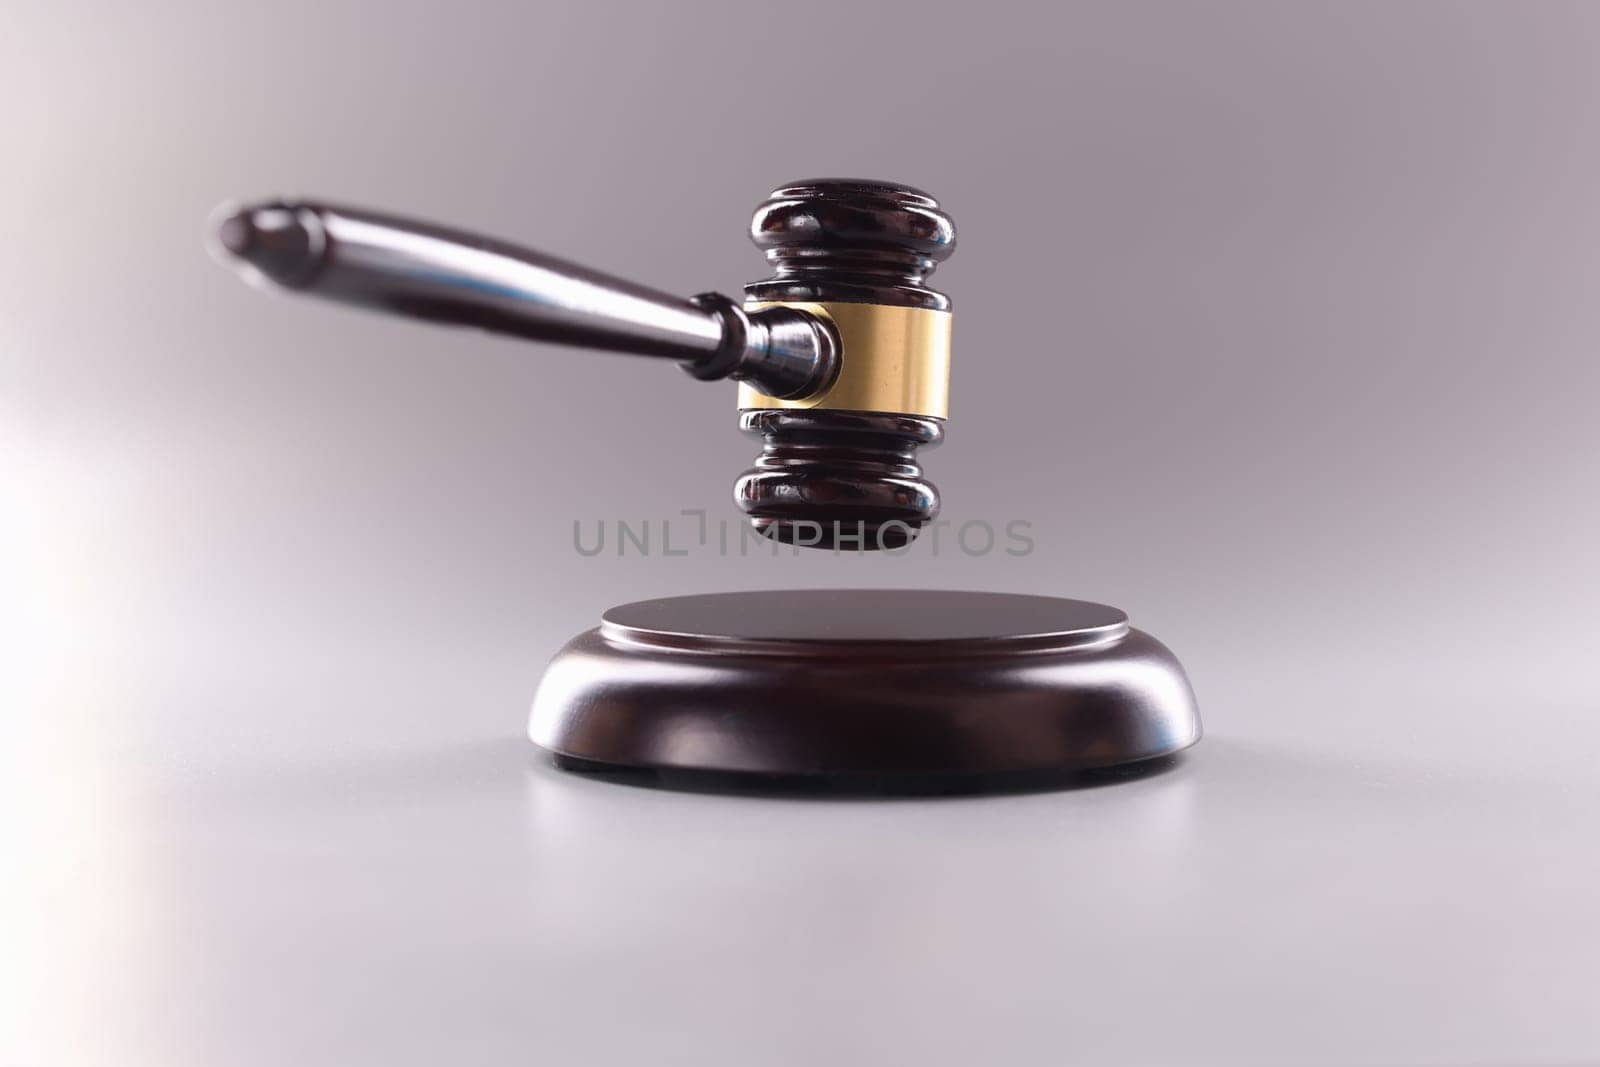 Wooden judge gavel in air on gray background. Judgment verdict or auction concept